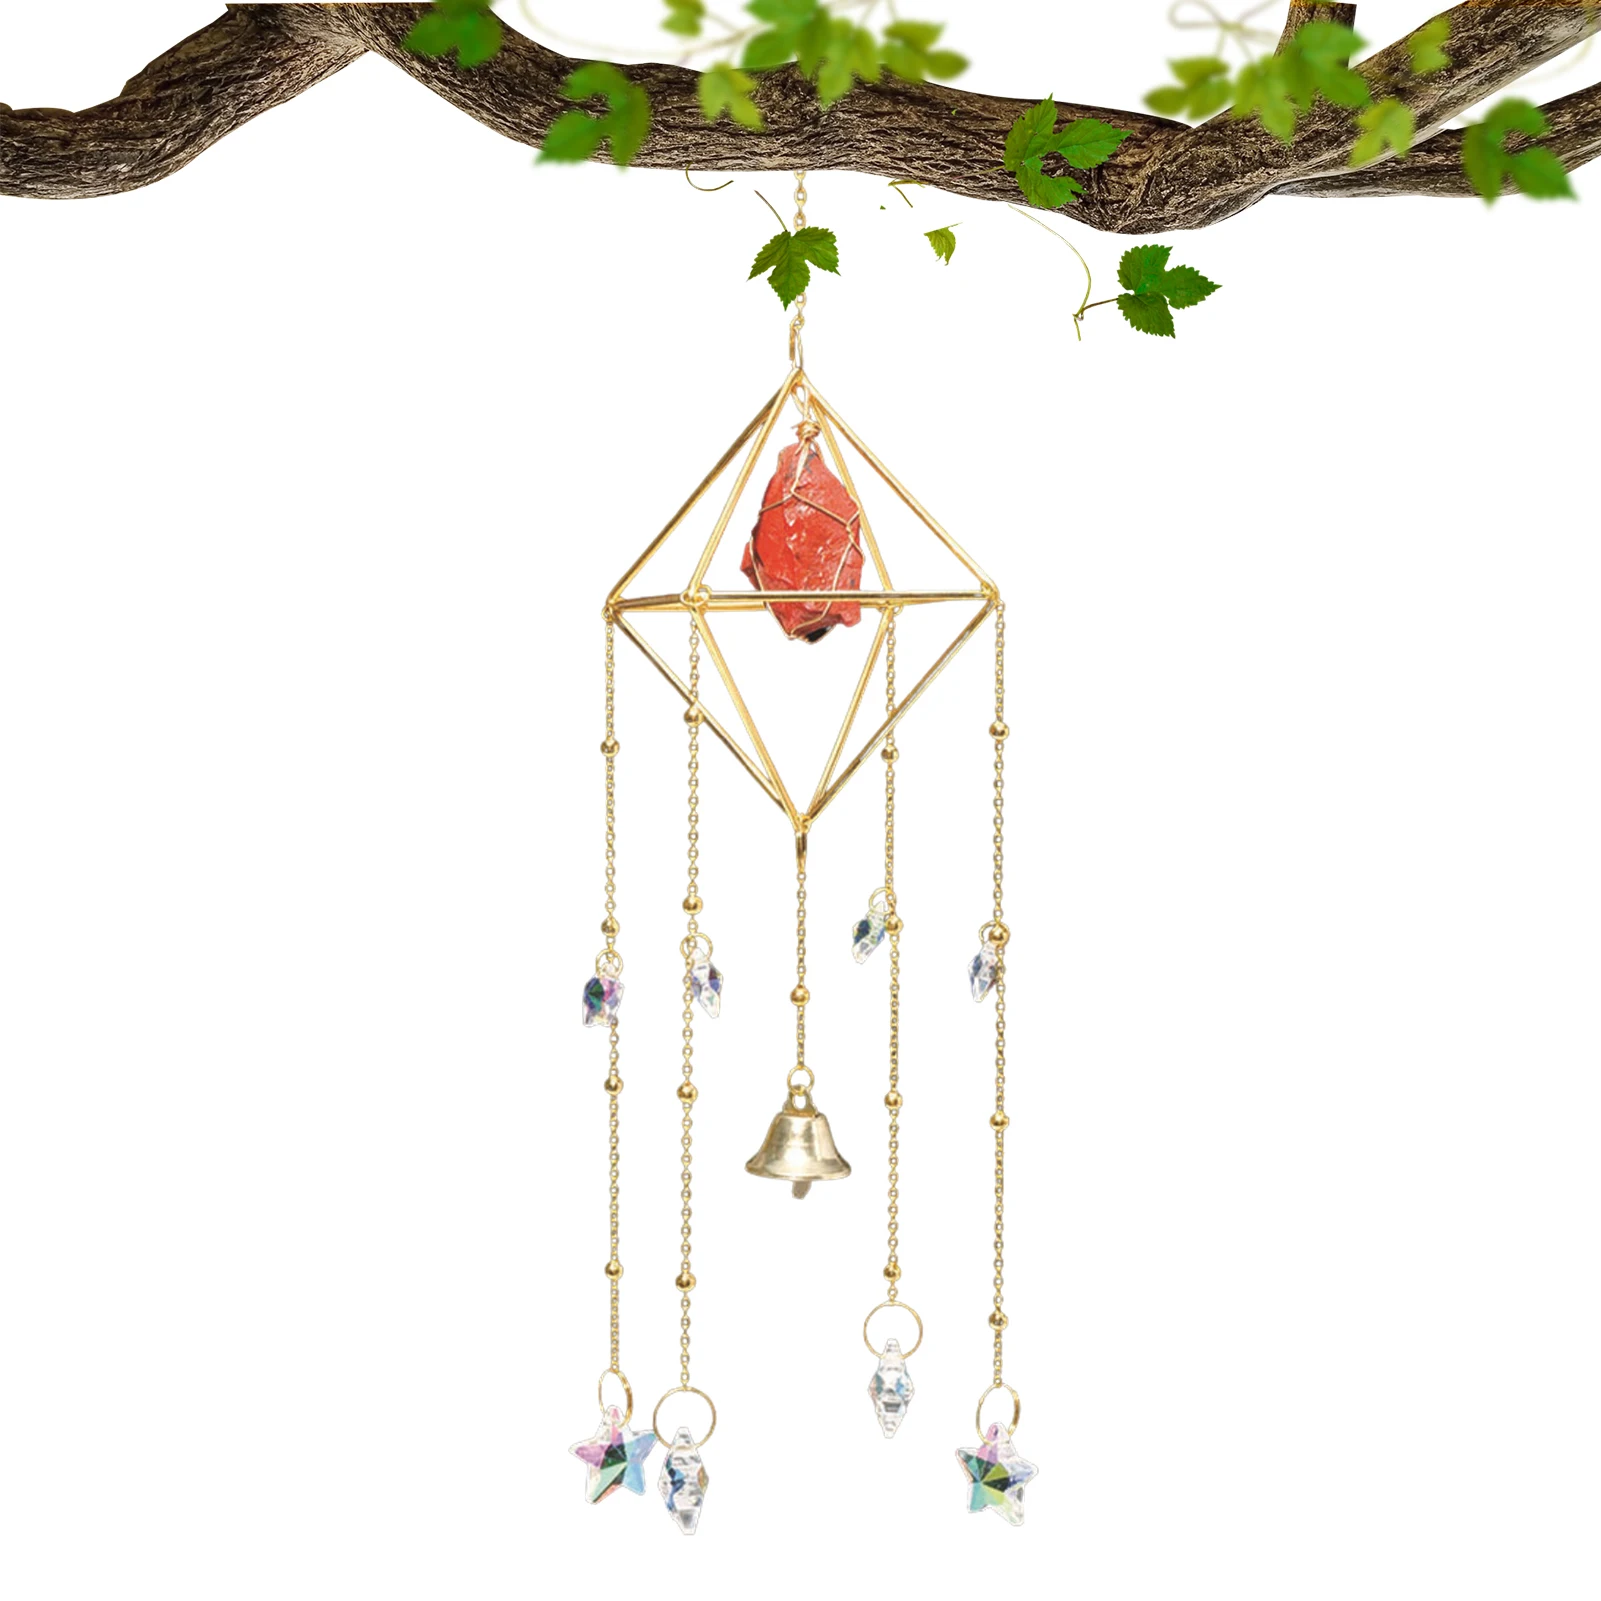 

Crystal Windchime Raw Stone Wind Chime Elegant Artwork Outside Gemstone Ornament Natural Wind Chimes For Garden Patio Balcony